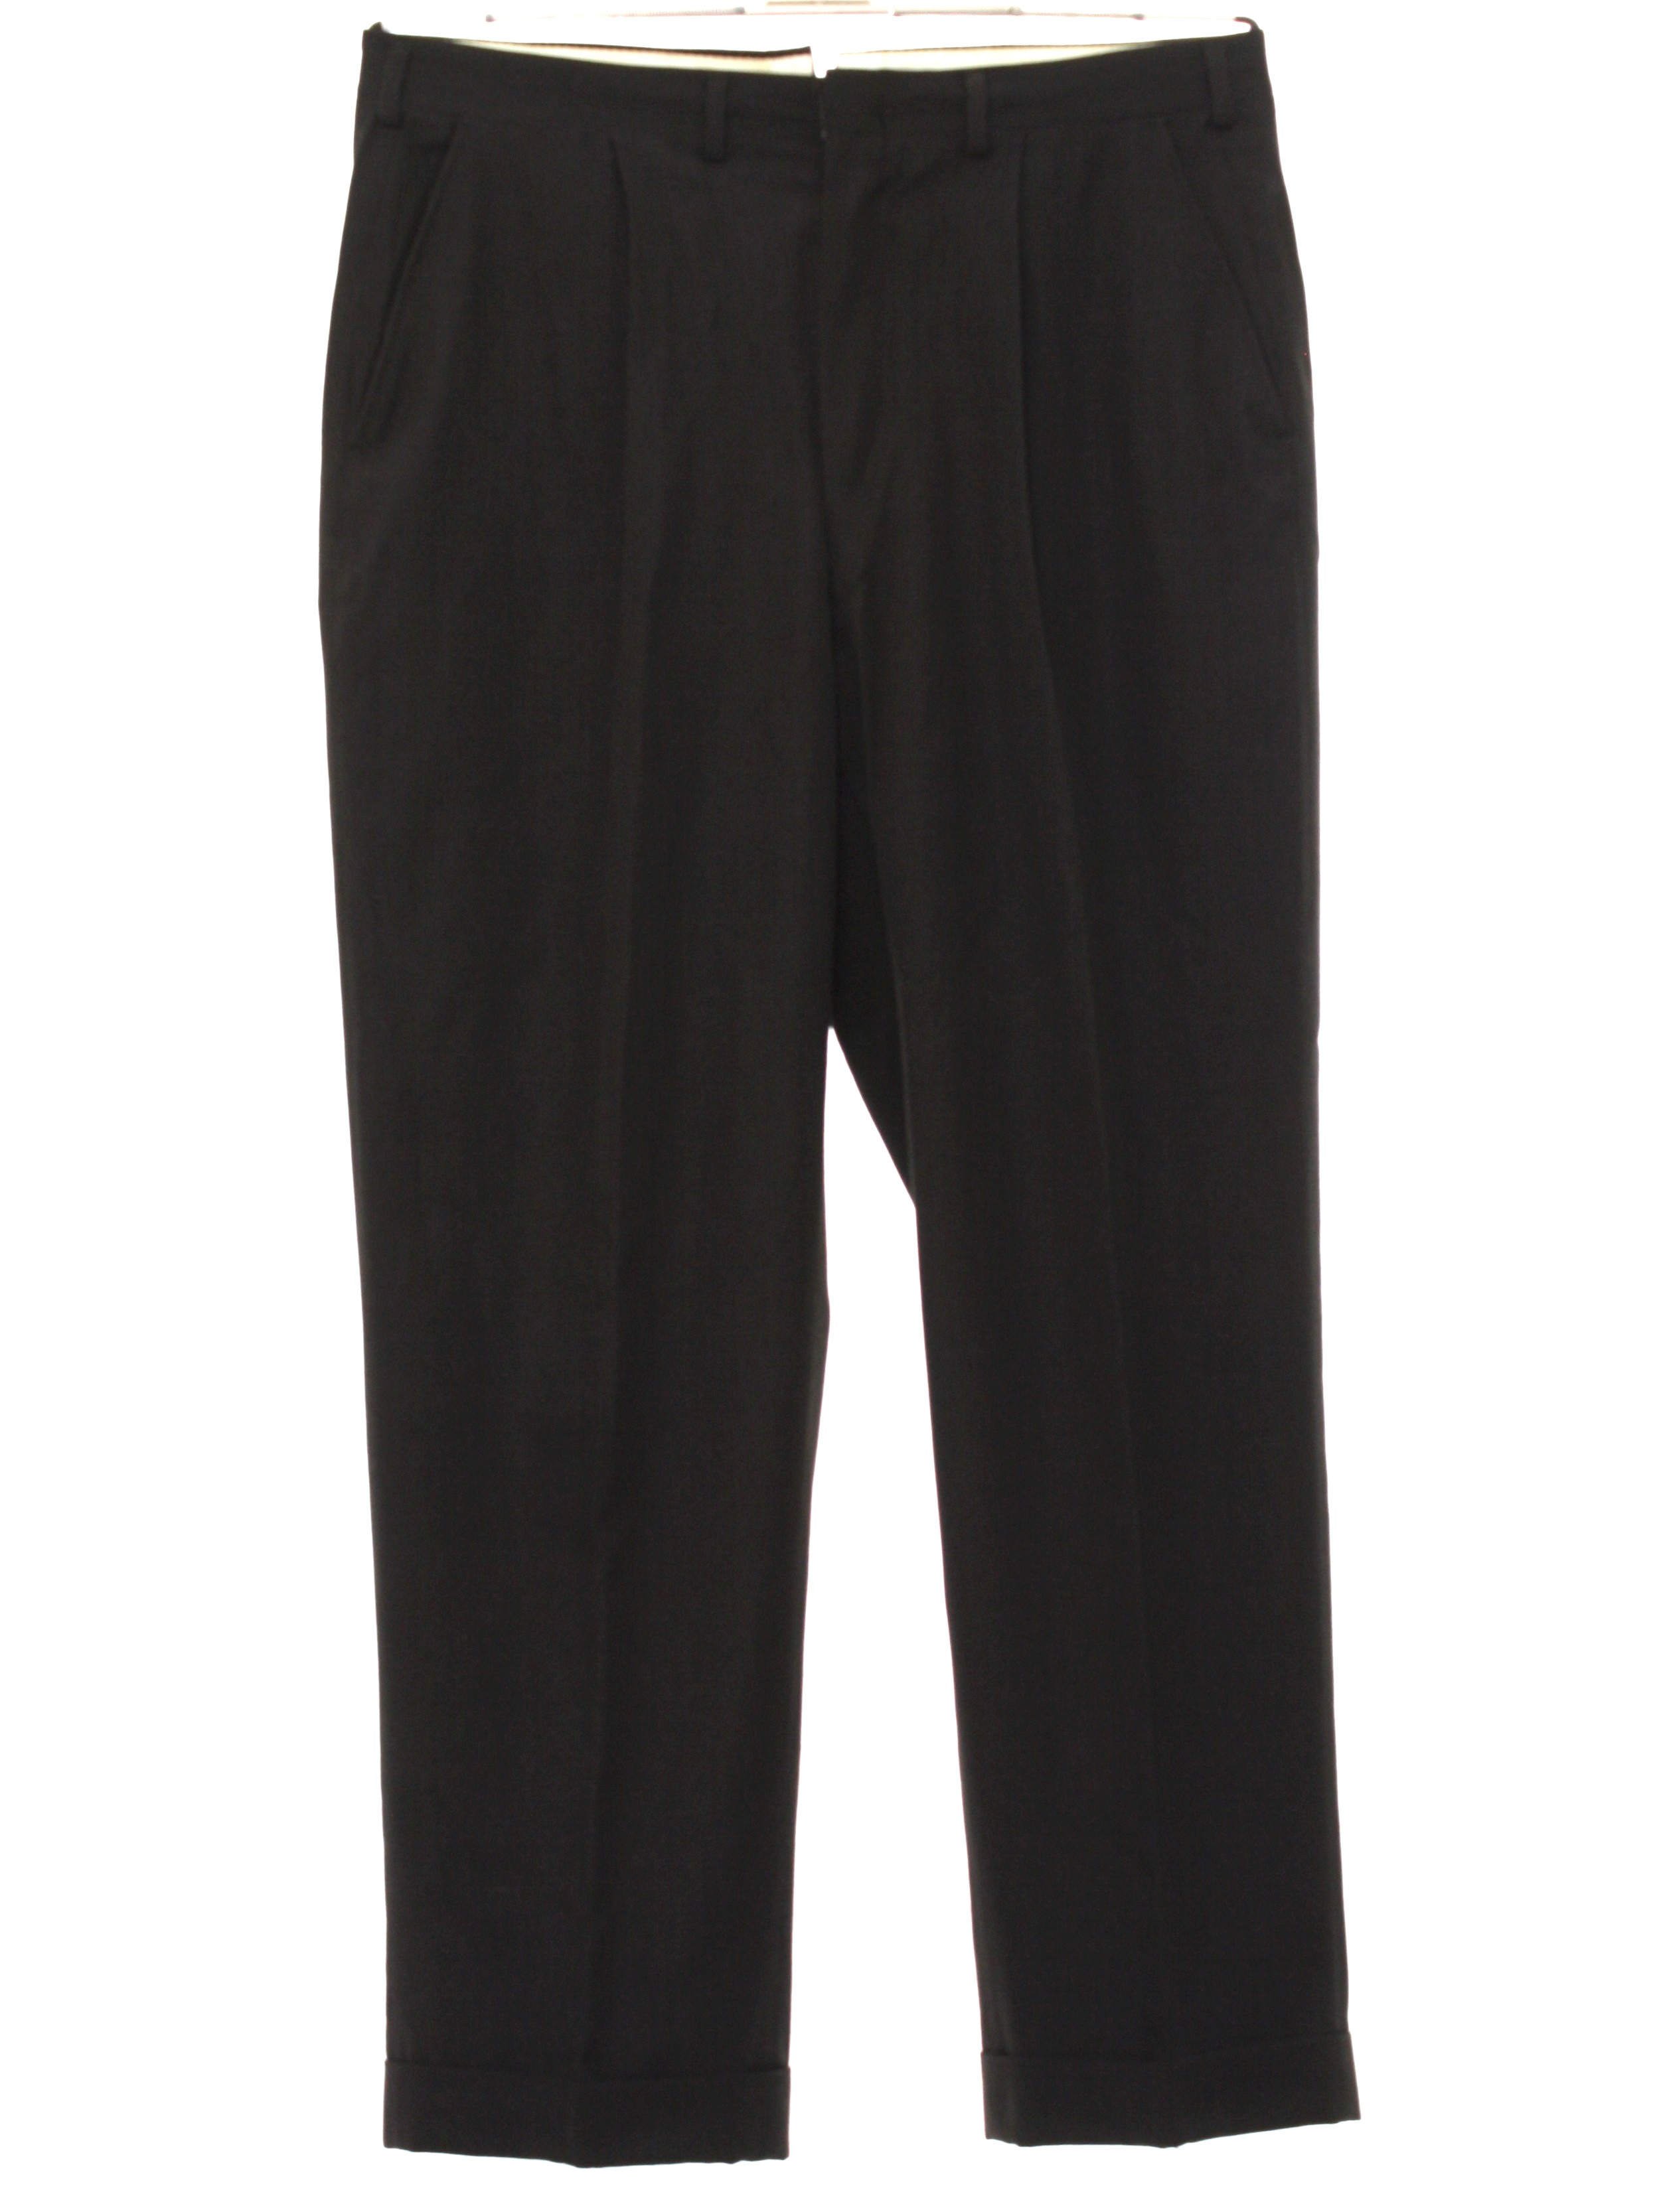 Retro 50s Pants (Missing Label) : 50s -Missing Label- Mens black with ...